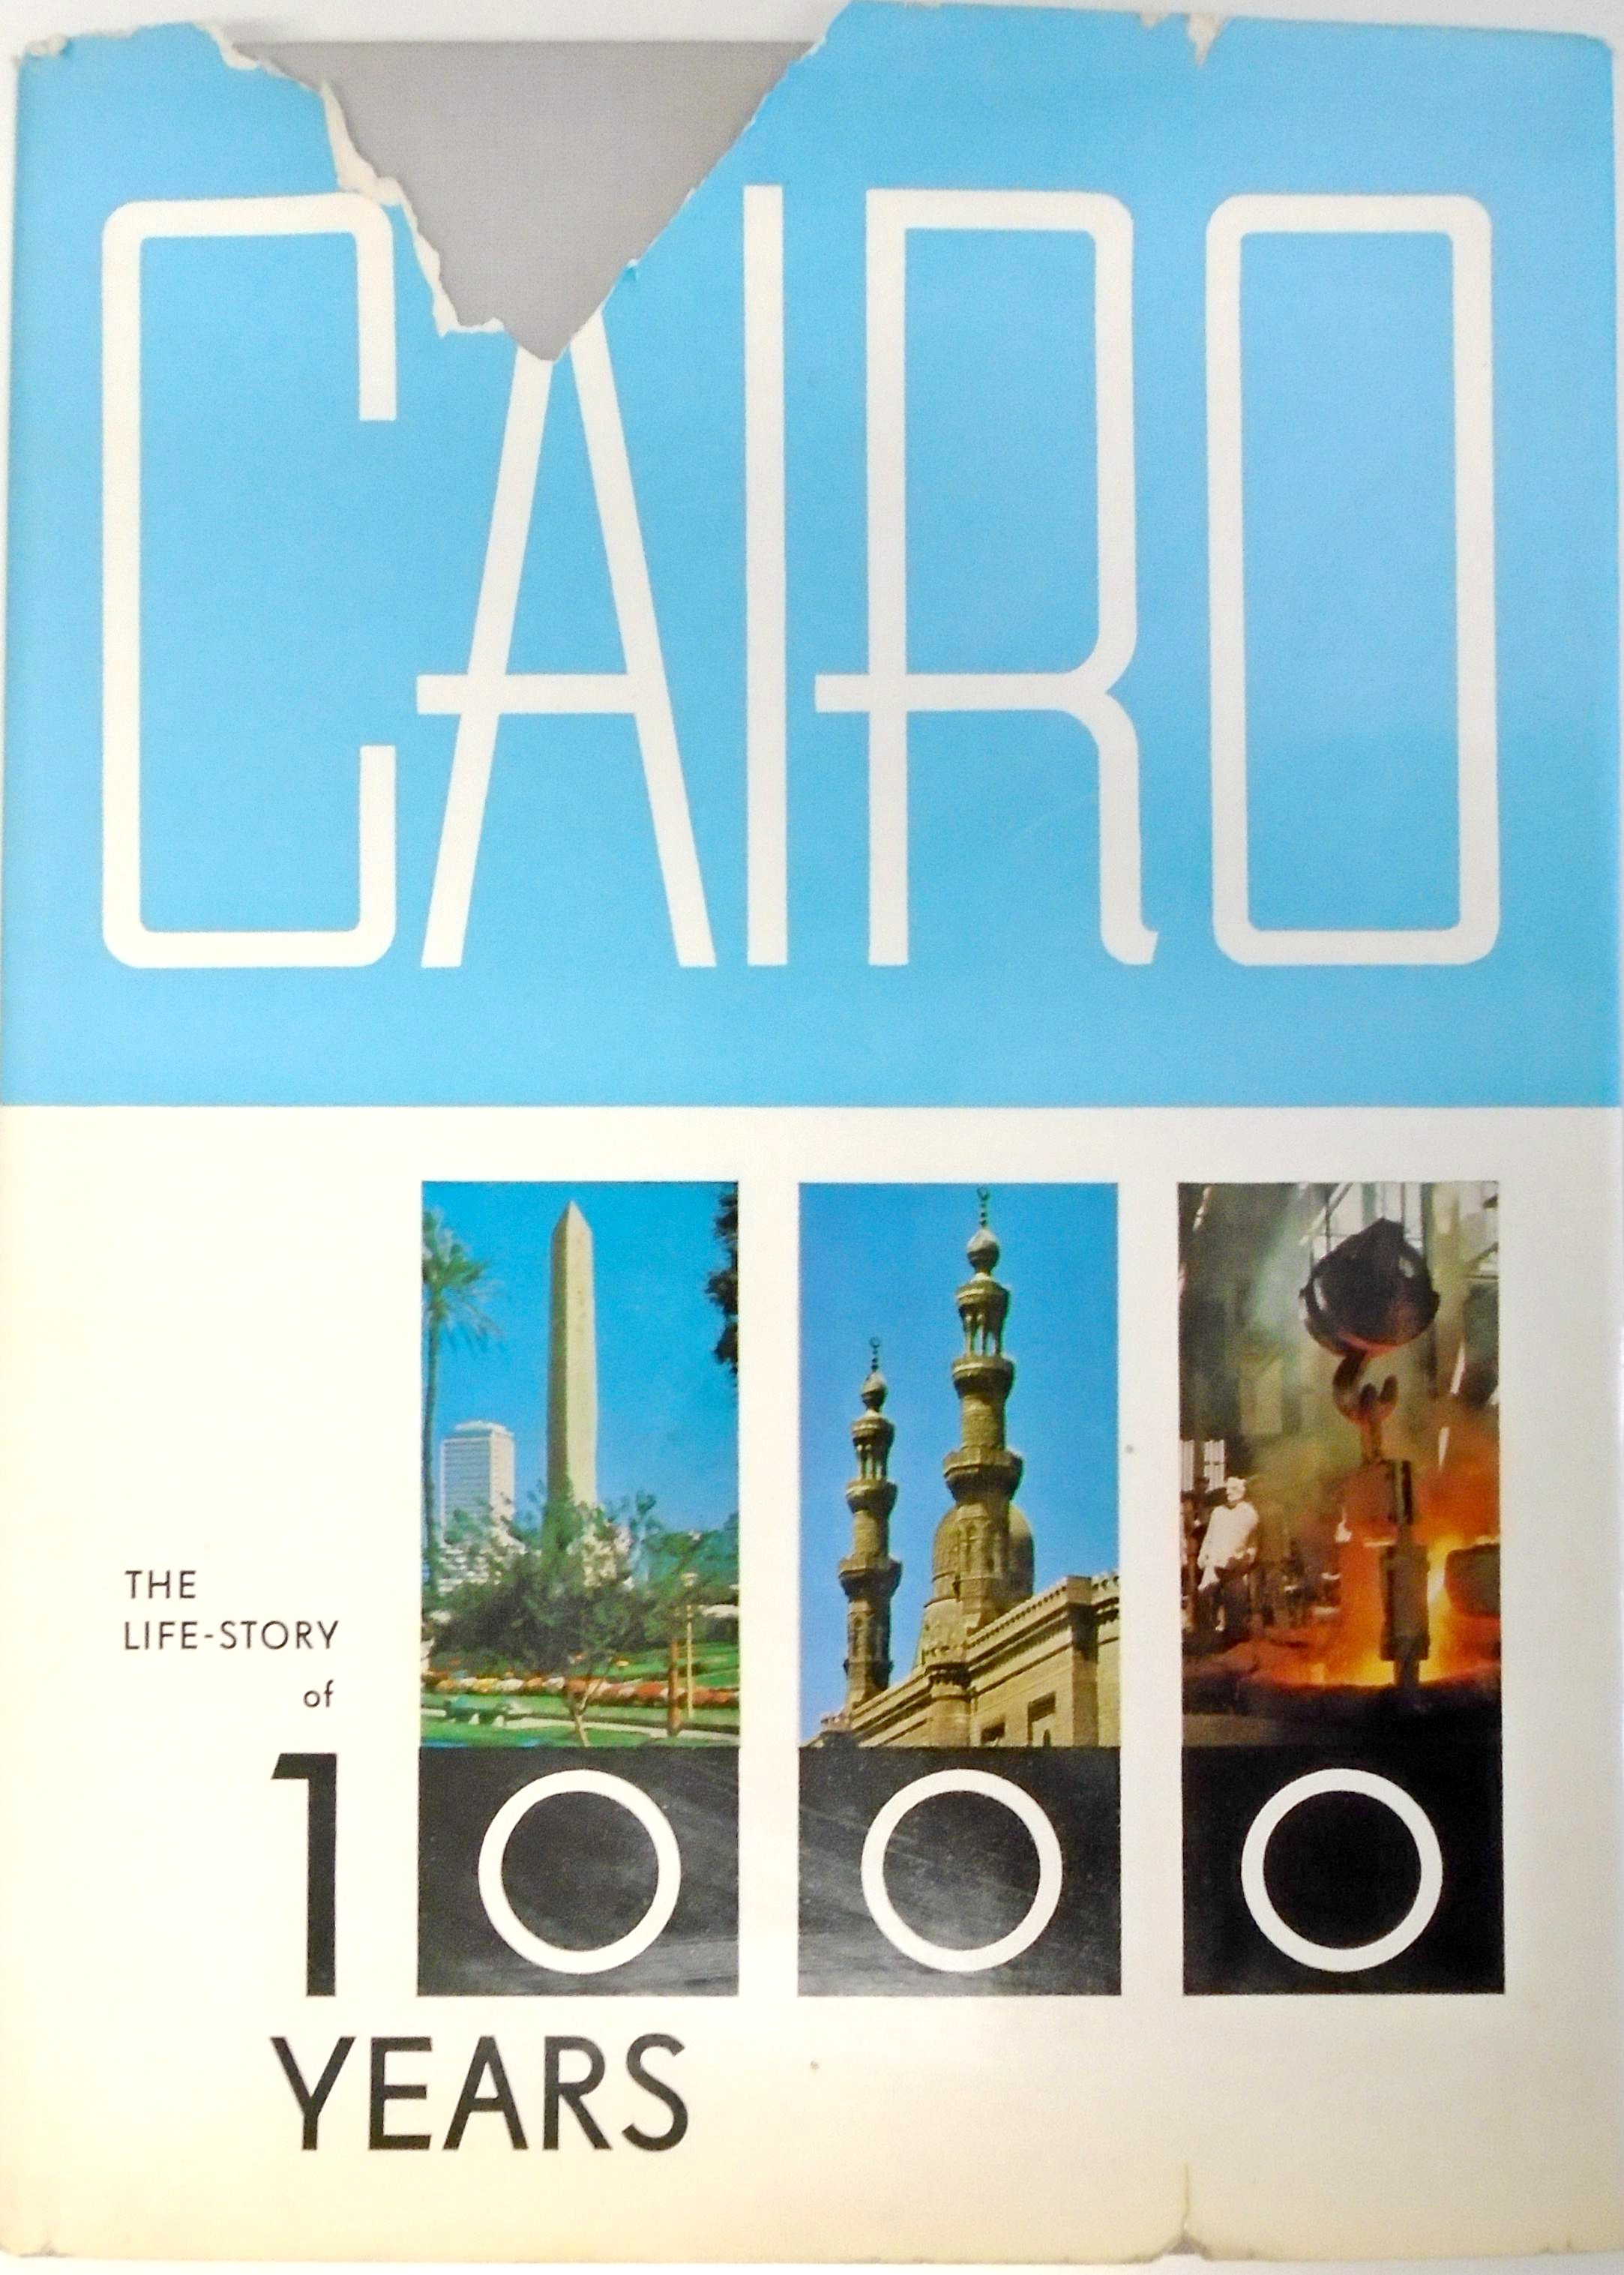 Cairo The Life-story of 1000 years 969-1969